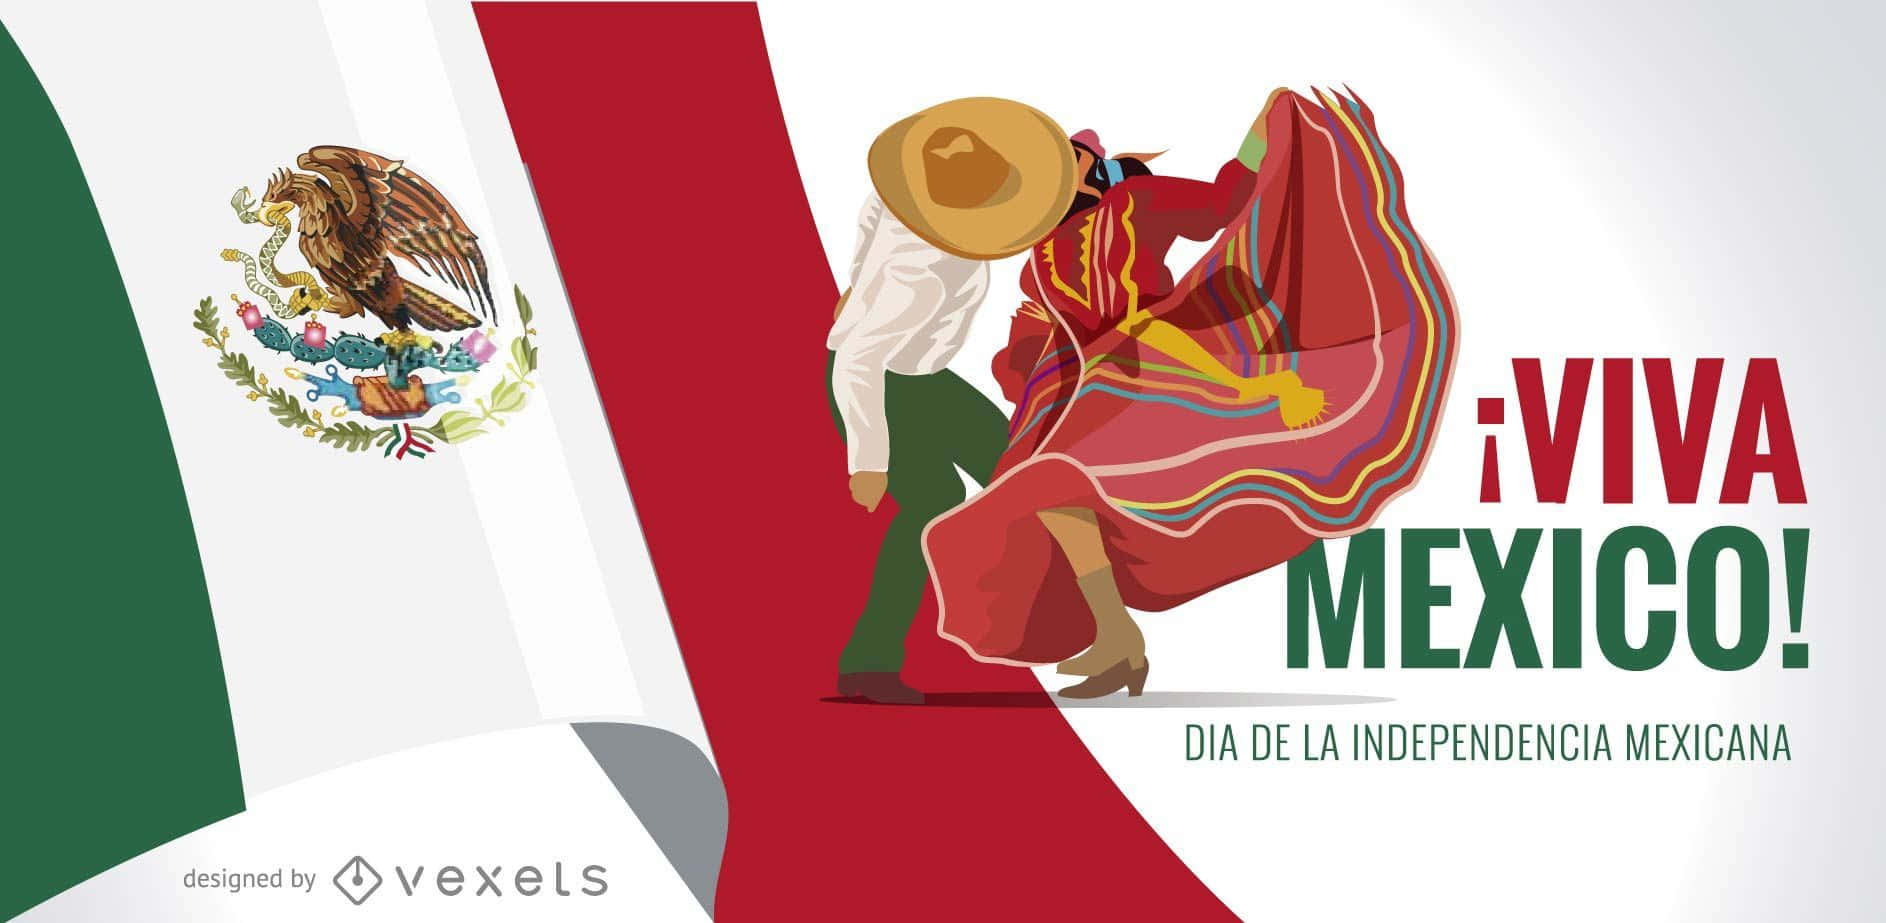 “viva Mexico! Celebrating The Country's Cultural Heritage.” Background